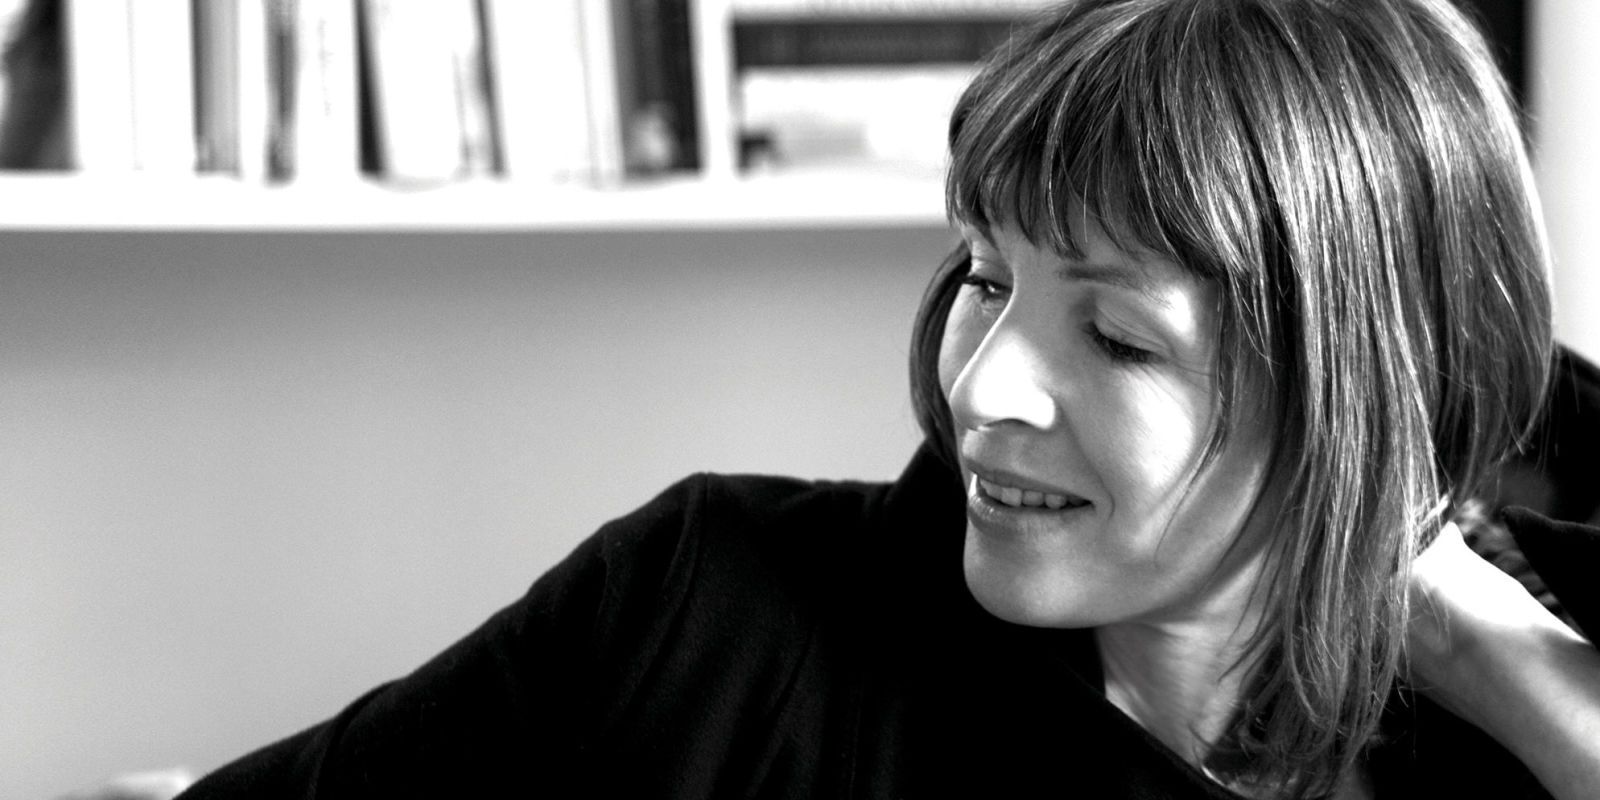 Review of 'Transit' by Rachel Cusk - Controversial Feminist Author